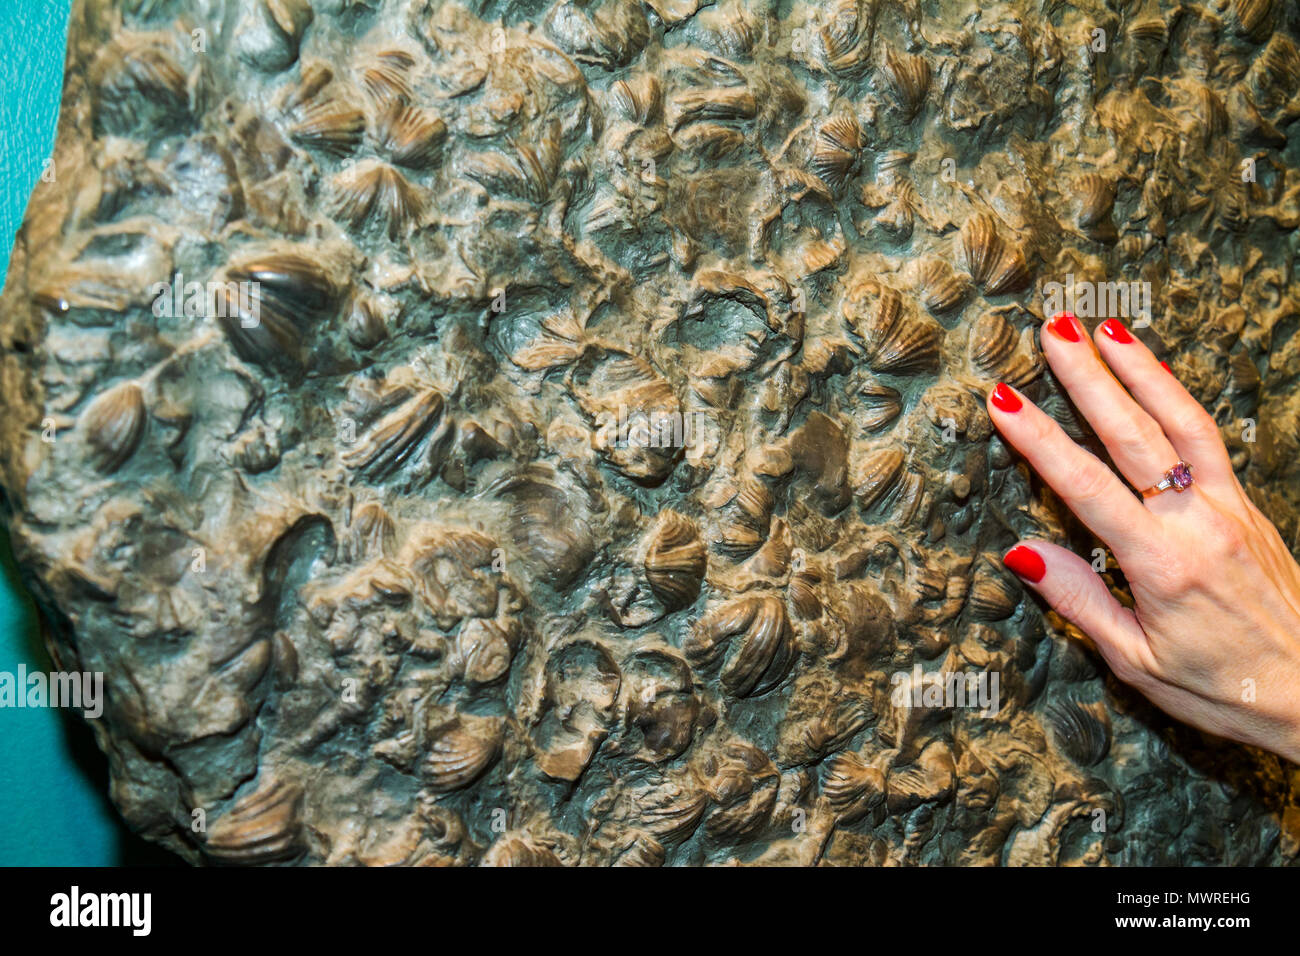 Washington DC,National Museum of Natural History,Sant Ocean Hall,exhibit exhibition collection products,display fossil,shells,woman's hand,hands,hands Stock Photo